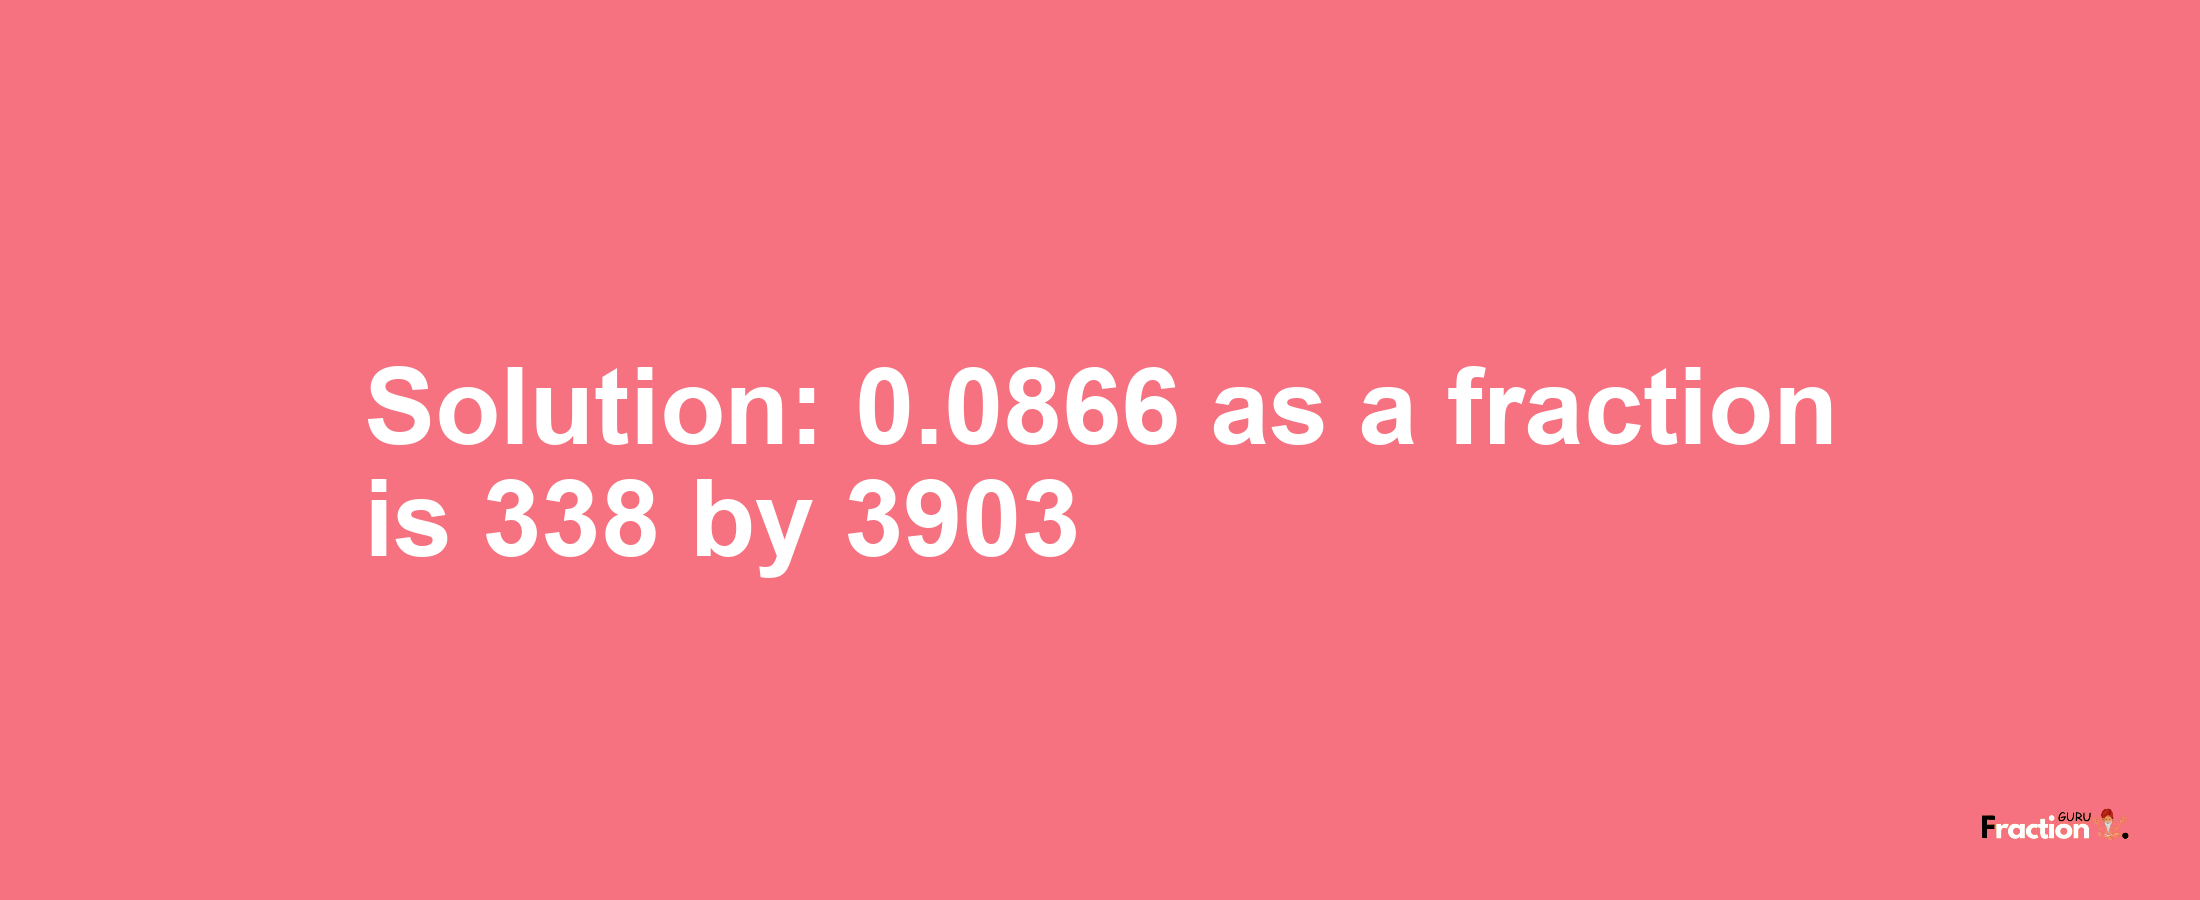 Solution:0.0866 as a fraction is 338/3903